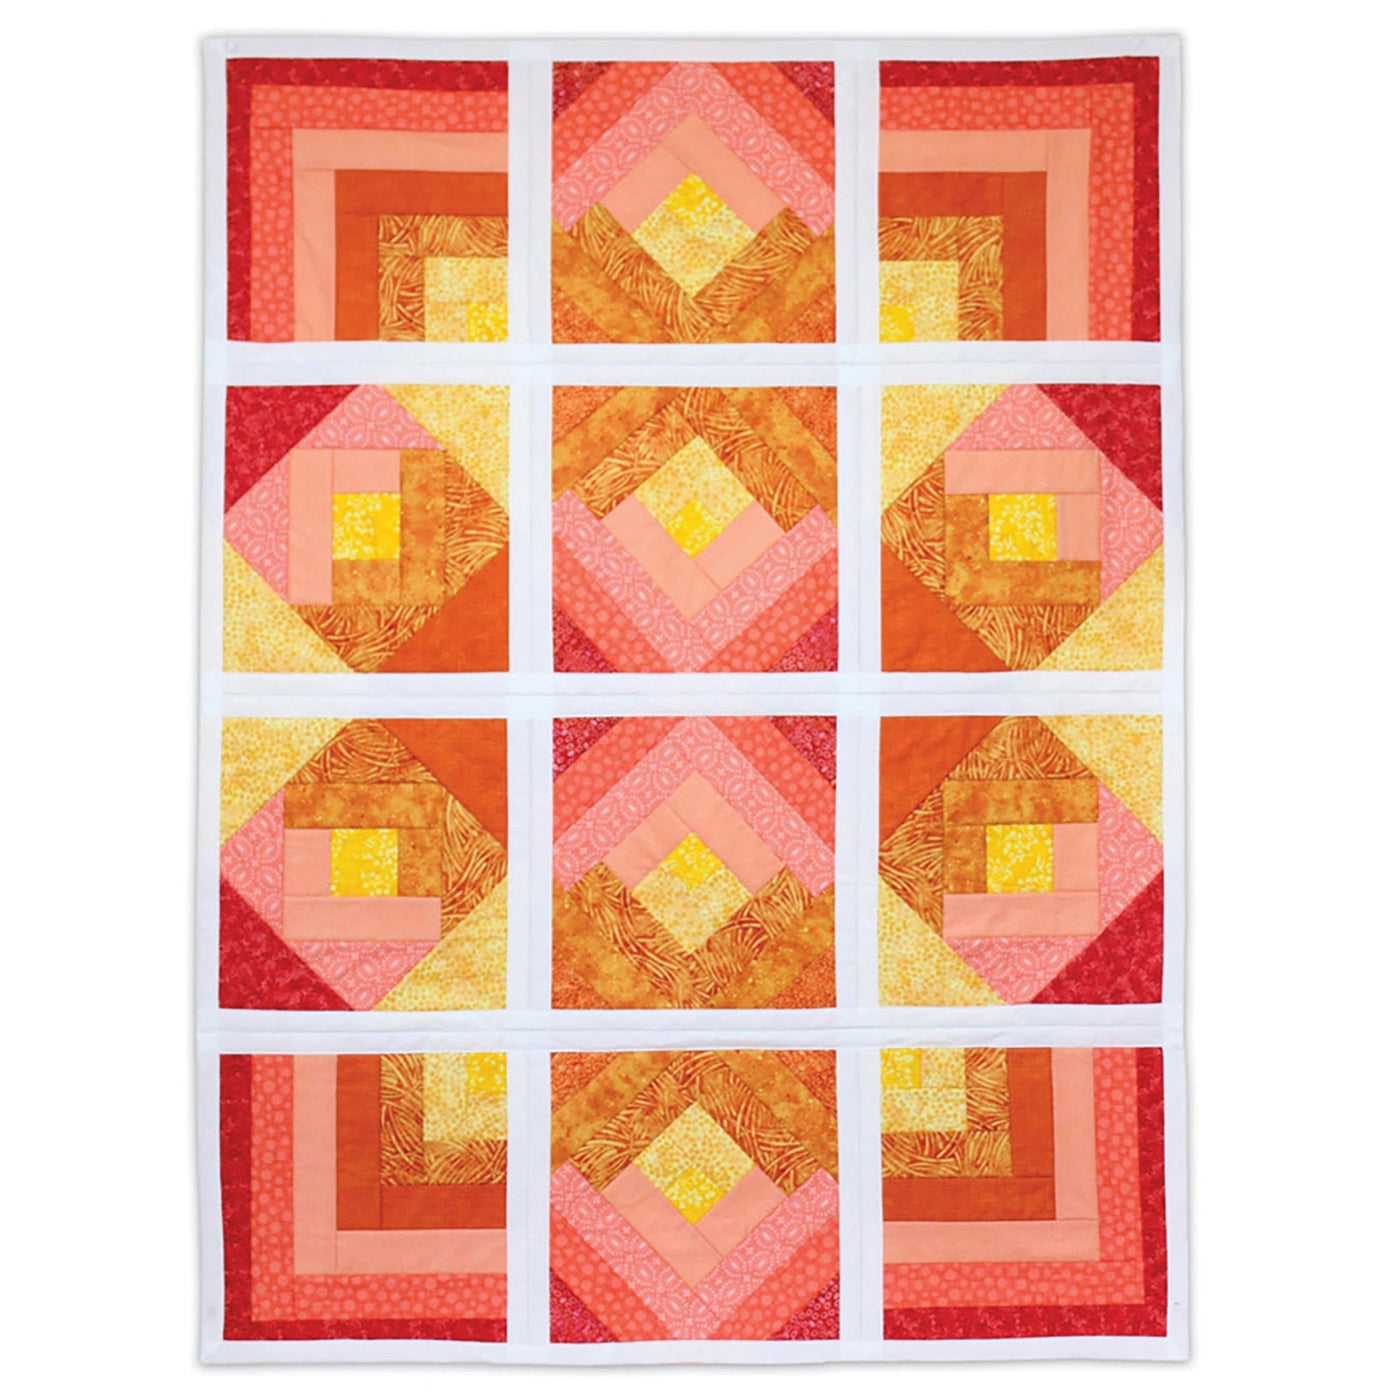 June Tailor Quilt As You Go Express Square in a Square Quilt Pattern